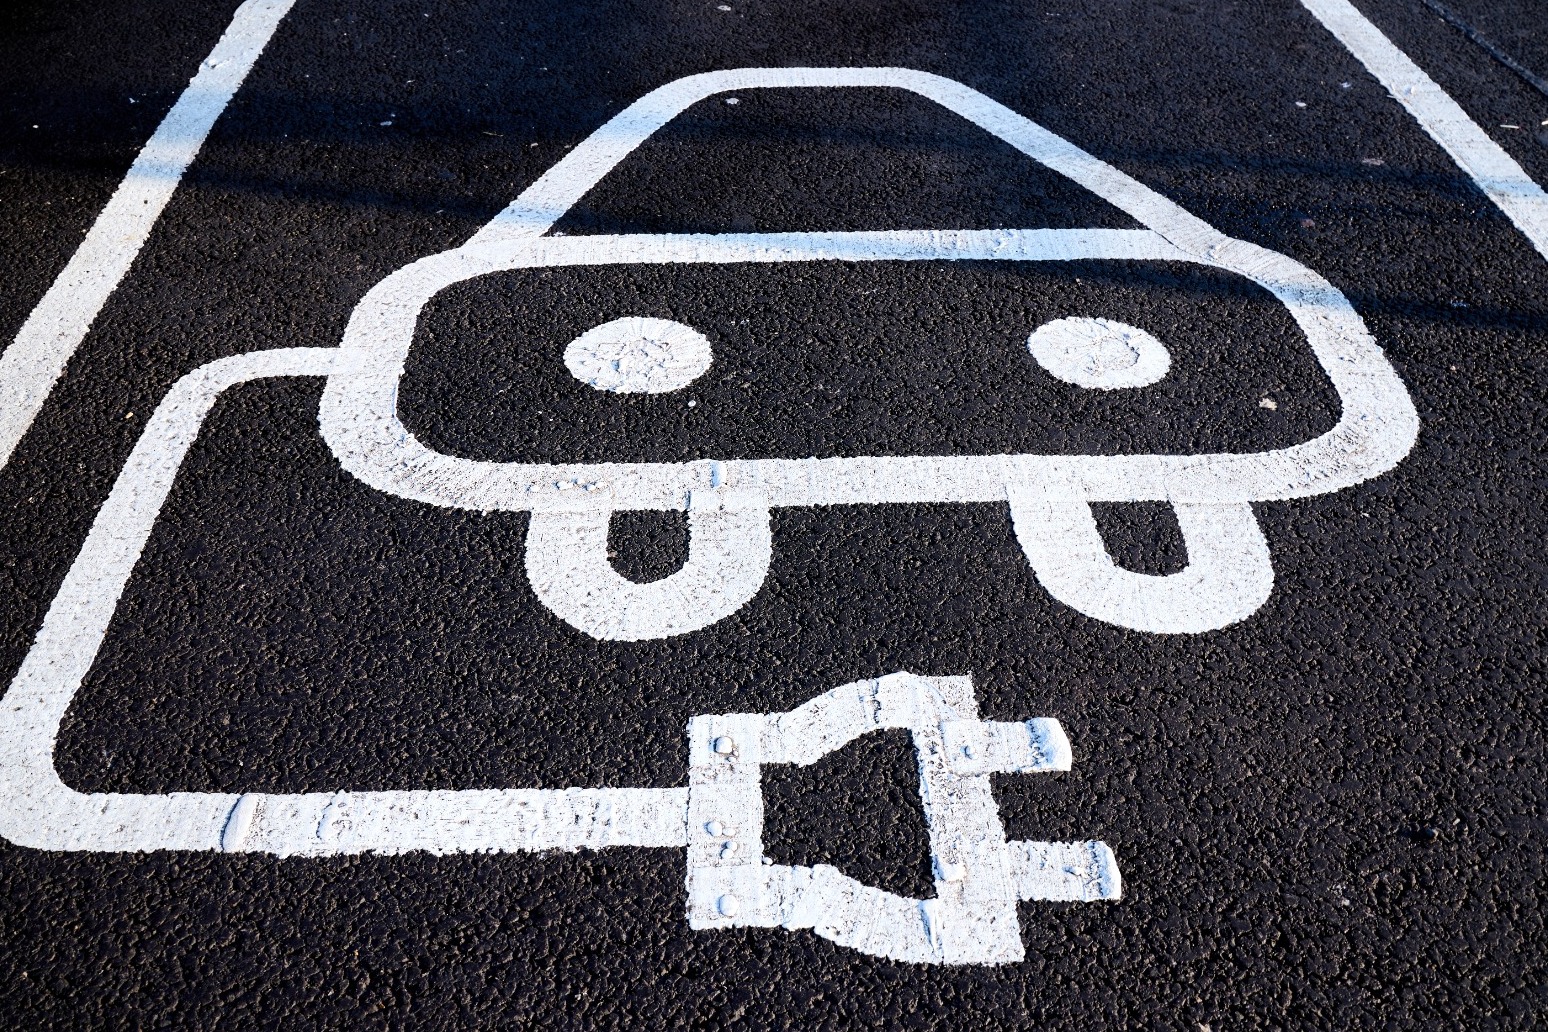 Most electric car owners unhappy with public charging infrastructure – survey 